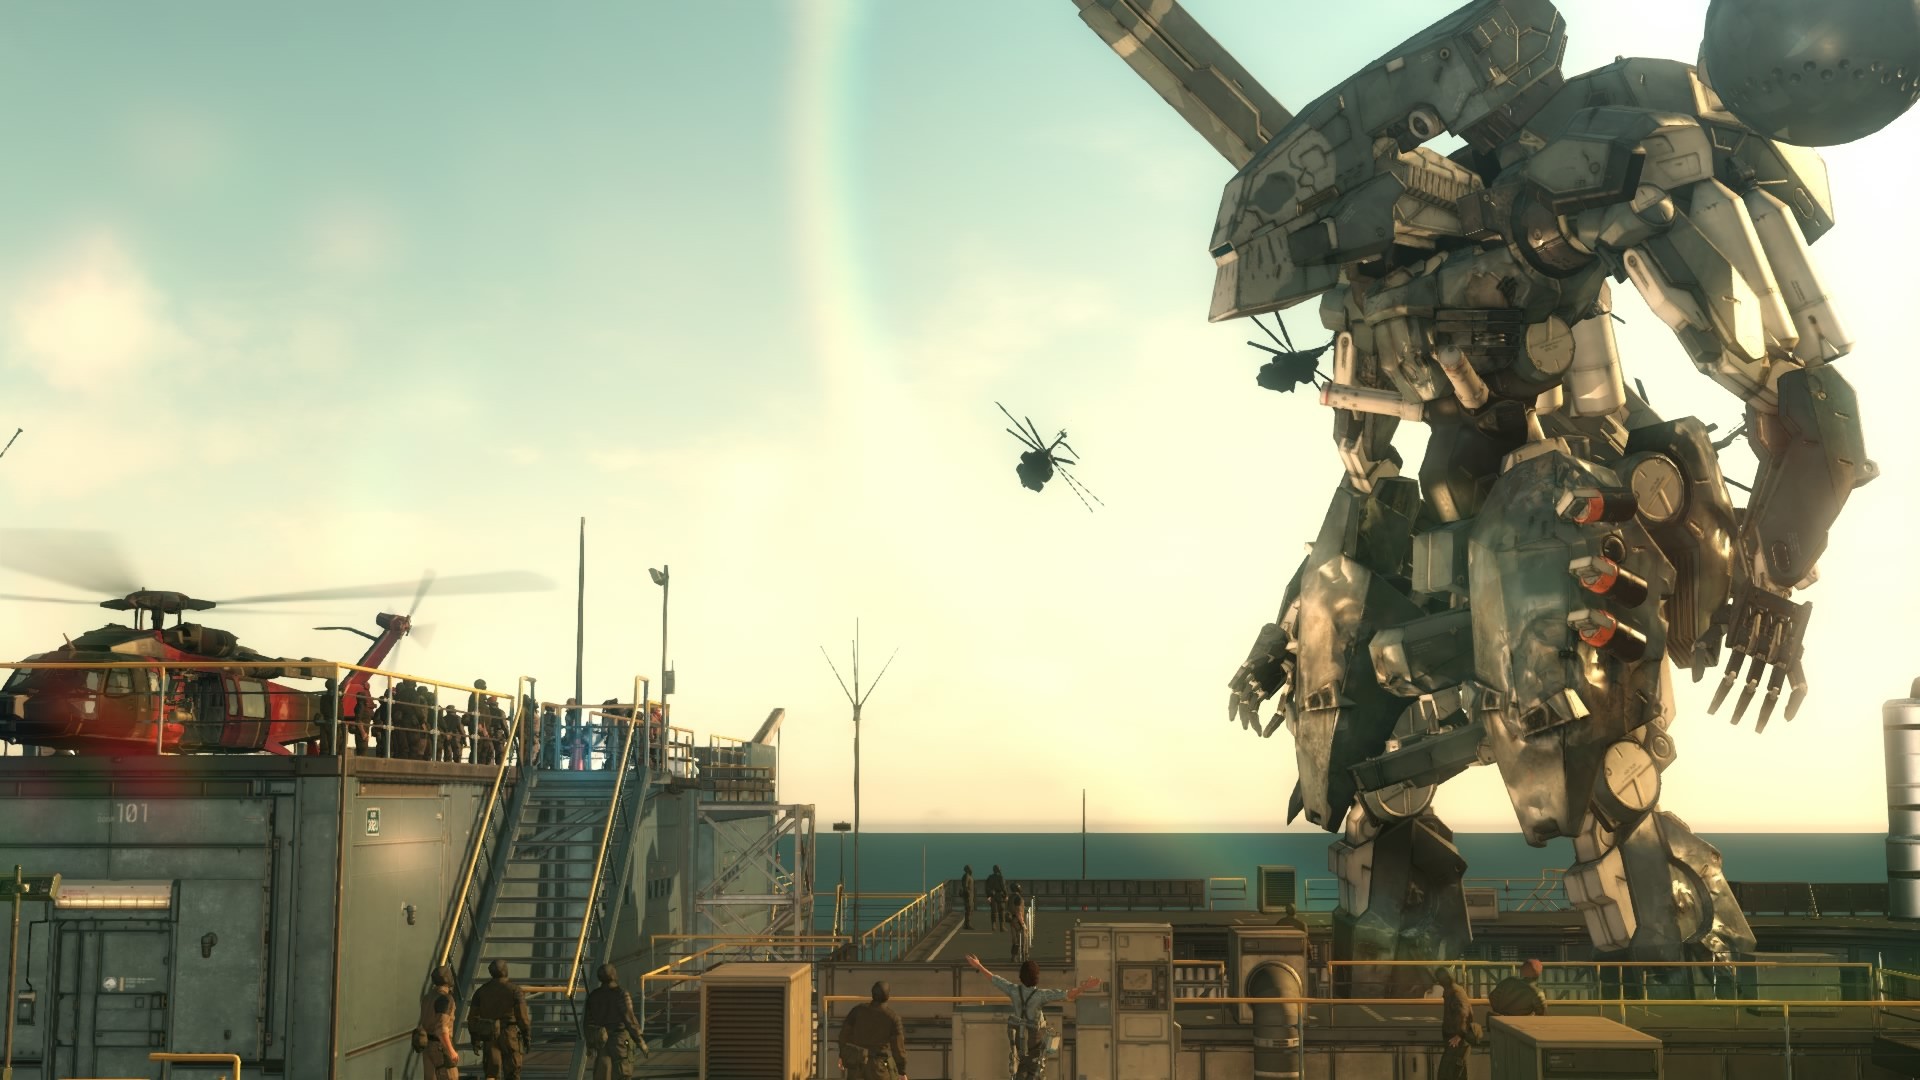 General 1920x1080 Metal Gear Solid V: The Phantom Pain Big Boss Metal Gear Solid Metal Gear video games mechs helicopters screen shot